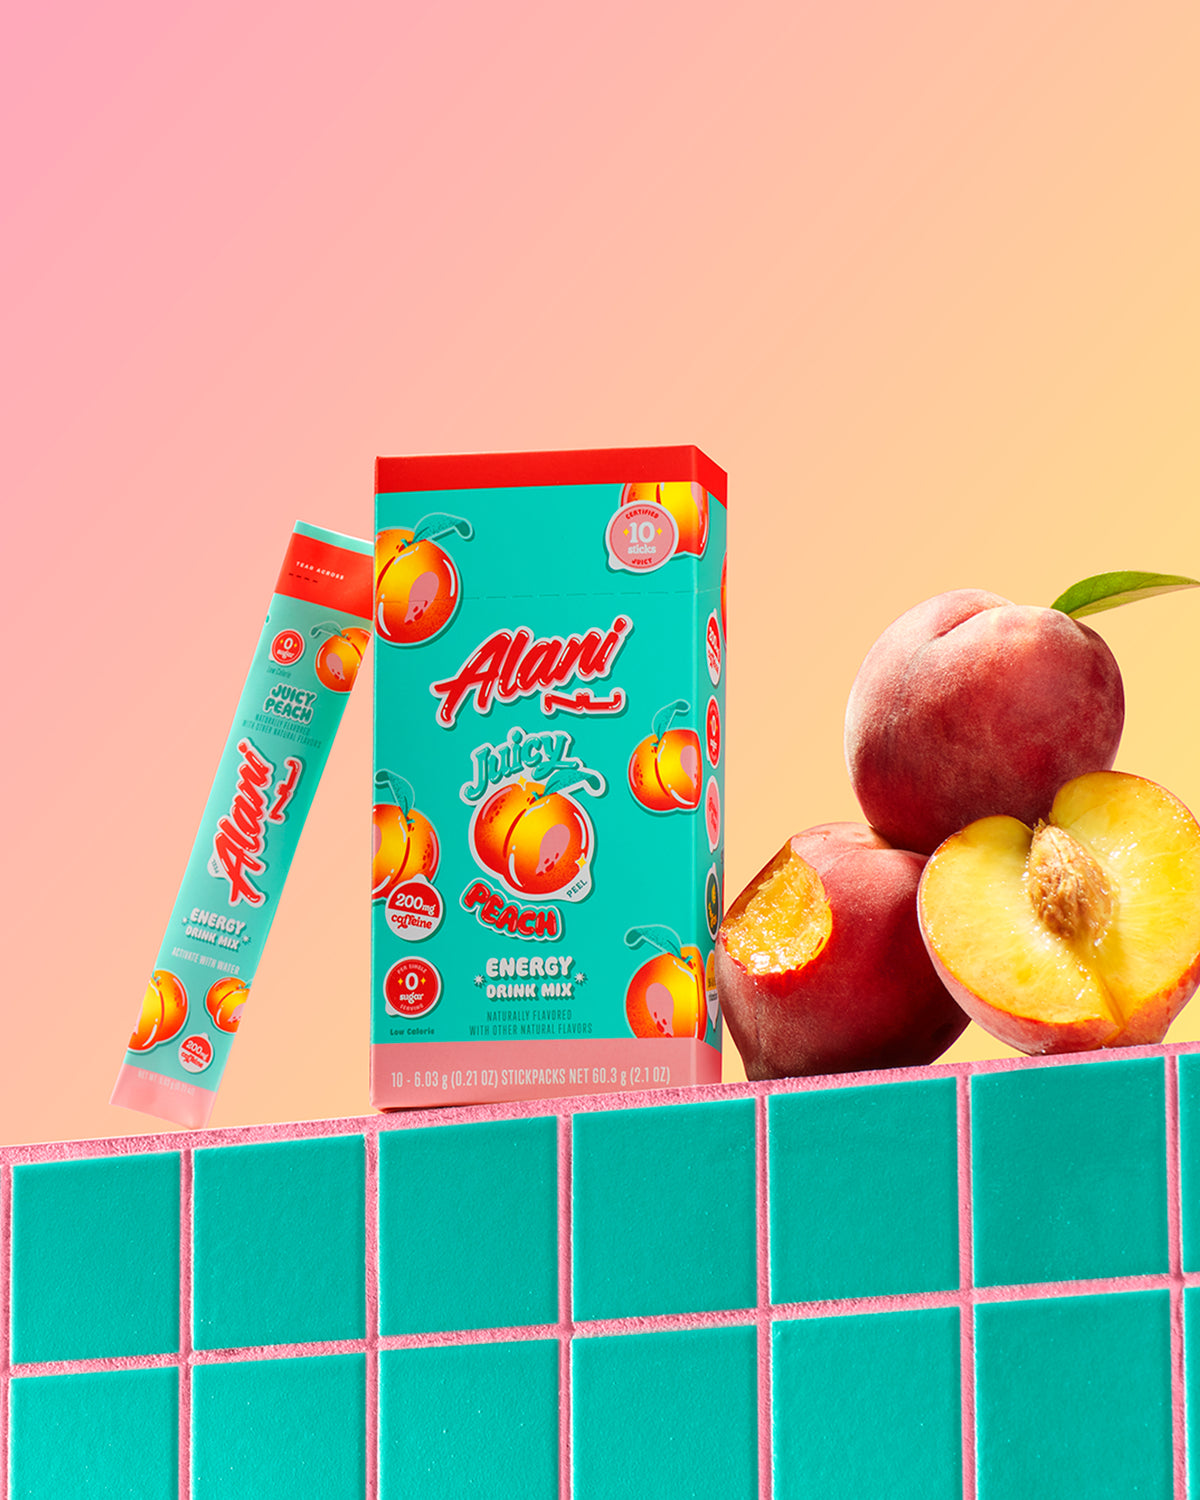 Energy Sticks in Juicy Peach displayed next to Peaches.